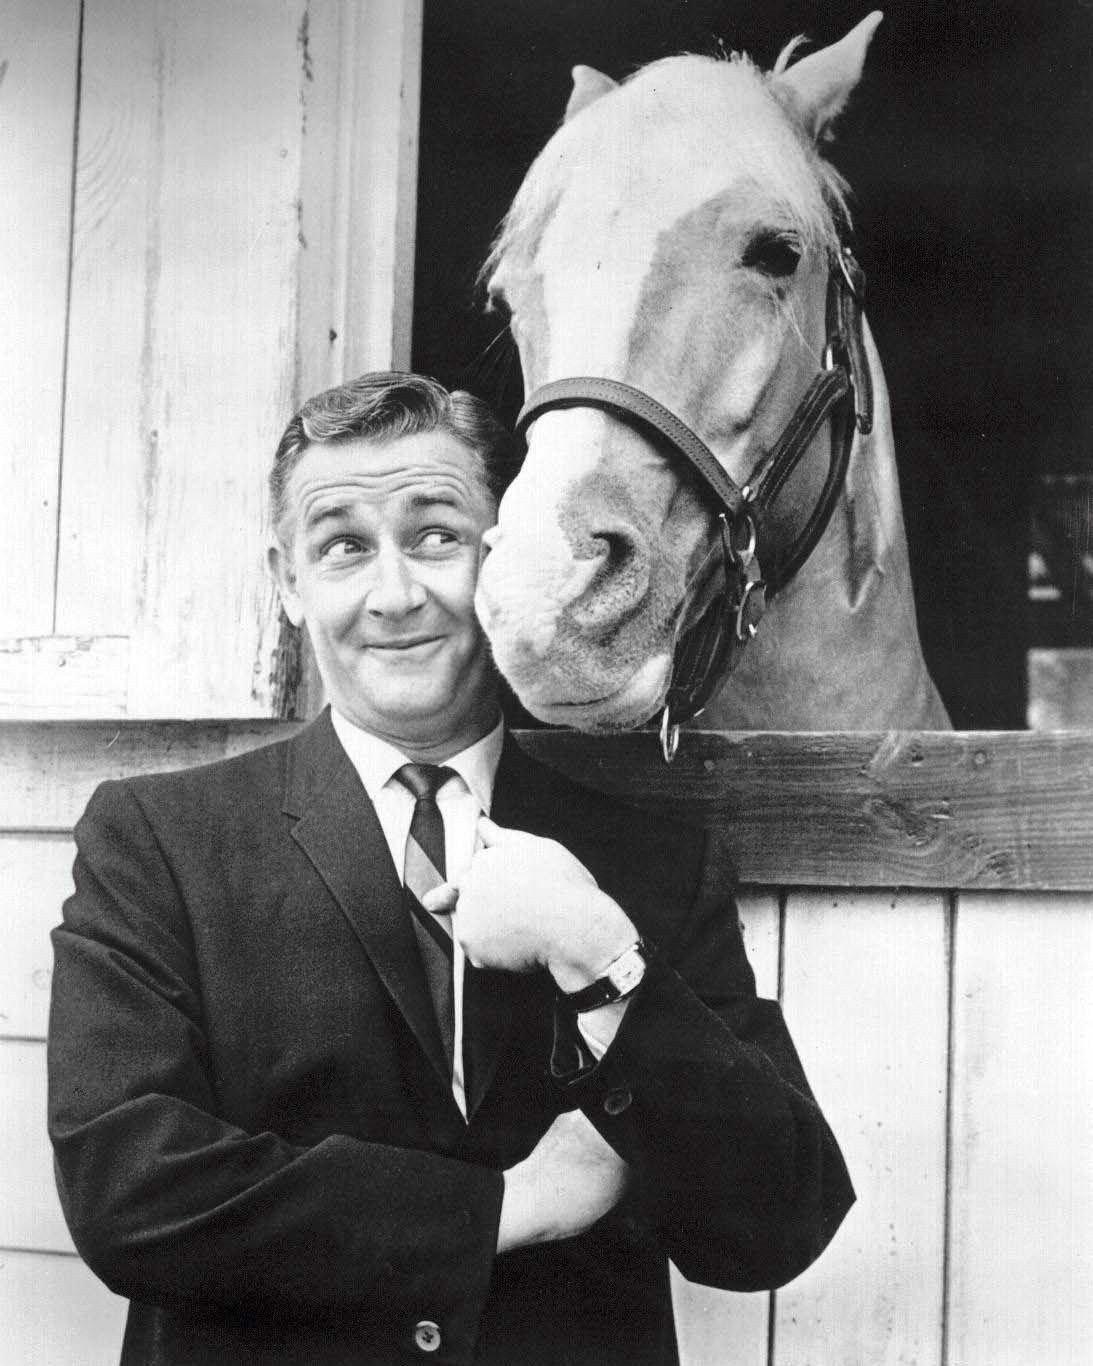 CONNIE HINES AND "MISTER ED" ALAN YOUNG ZY-122 8X10 PUBLICITY PHOTO 